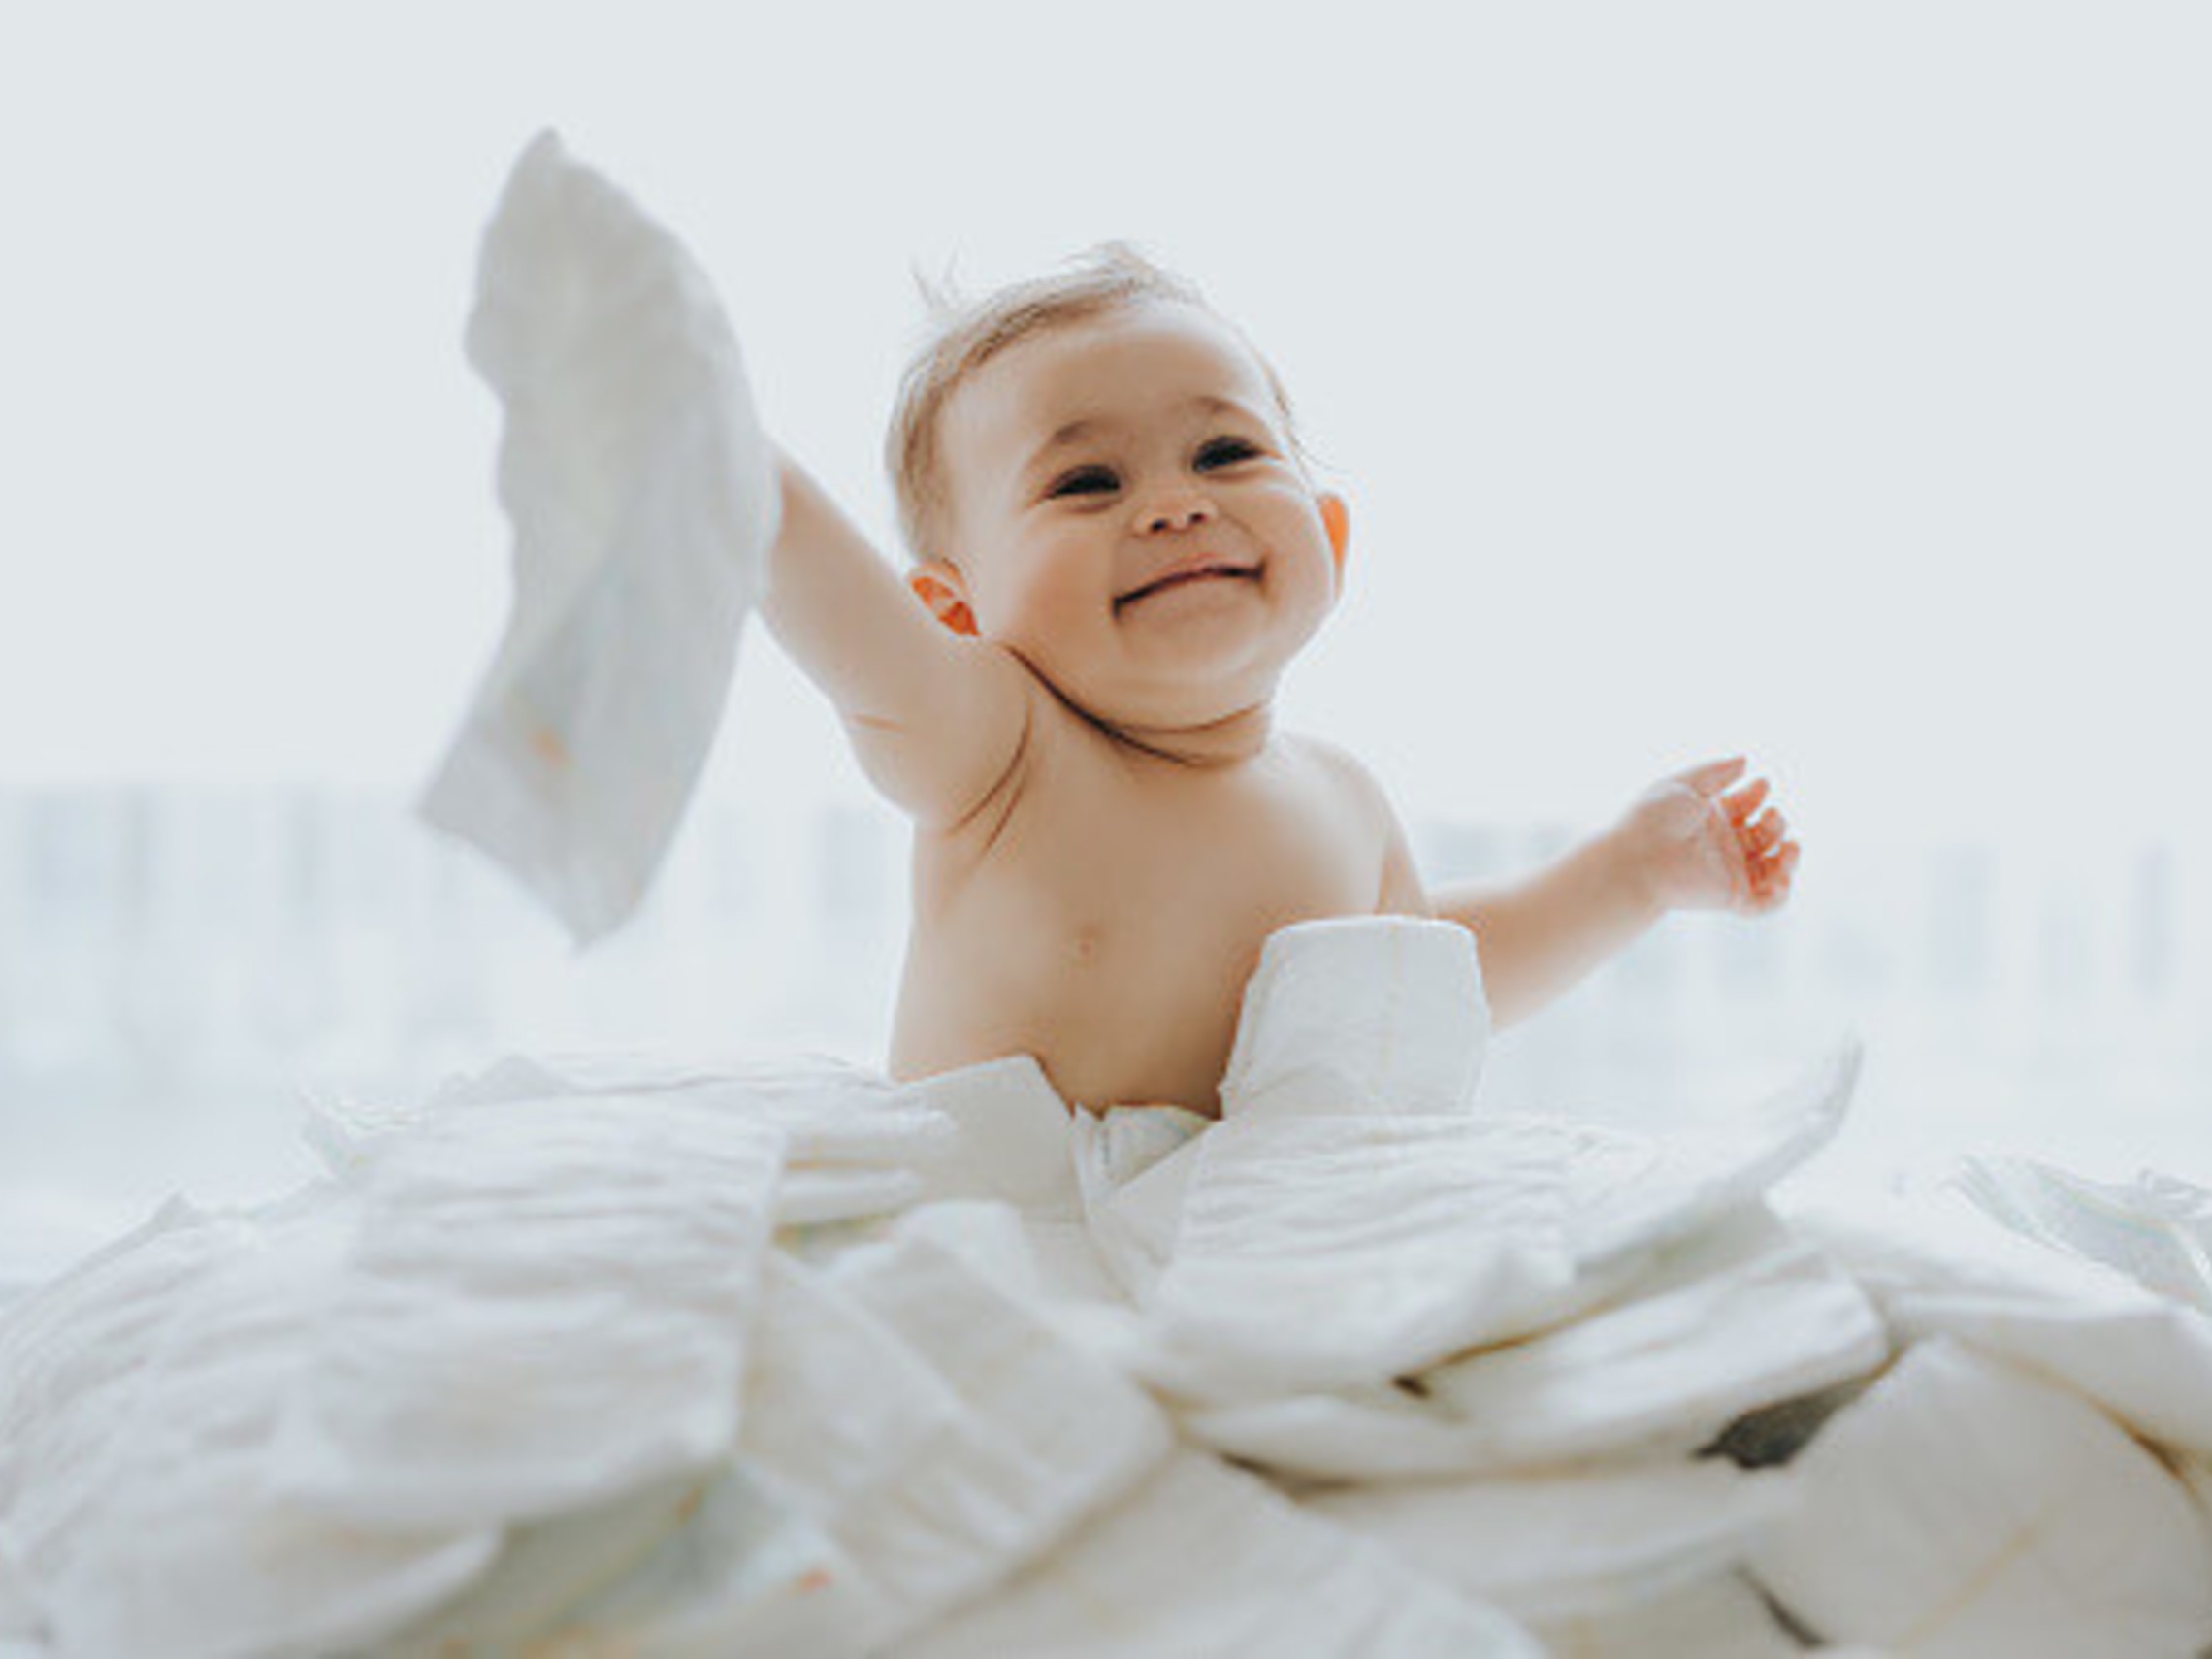 photo of small baby playing in a pile of new diapers